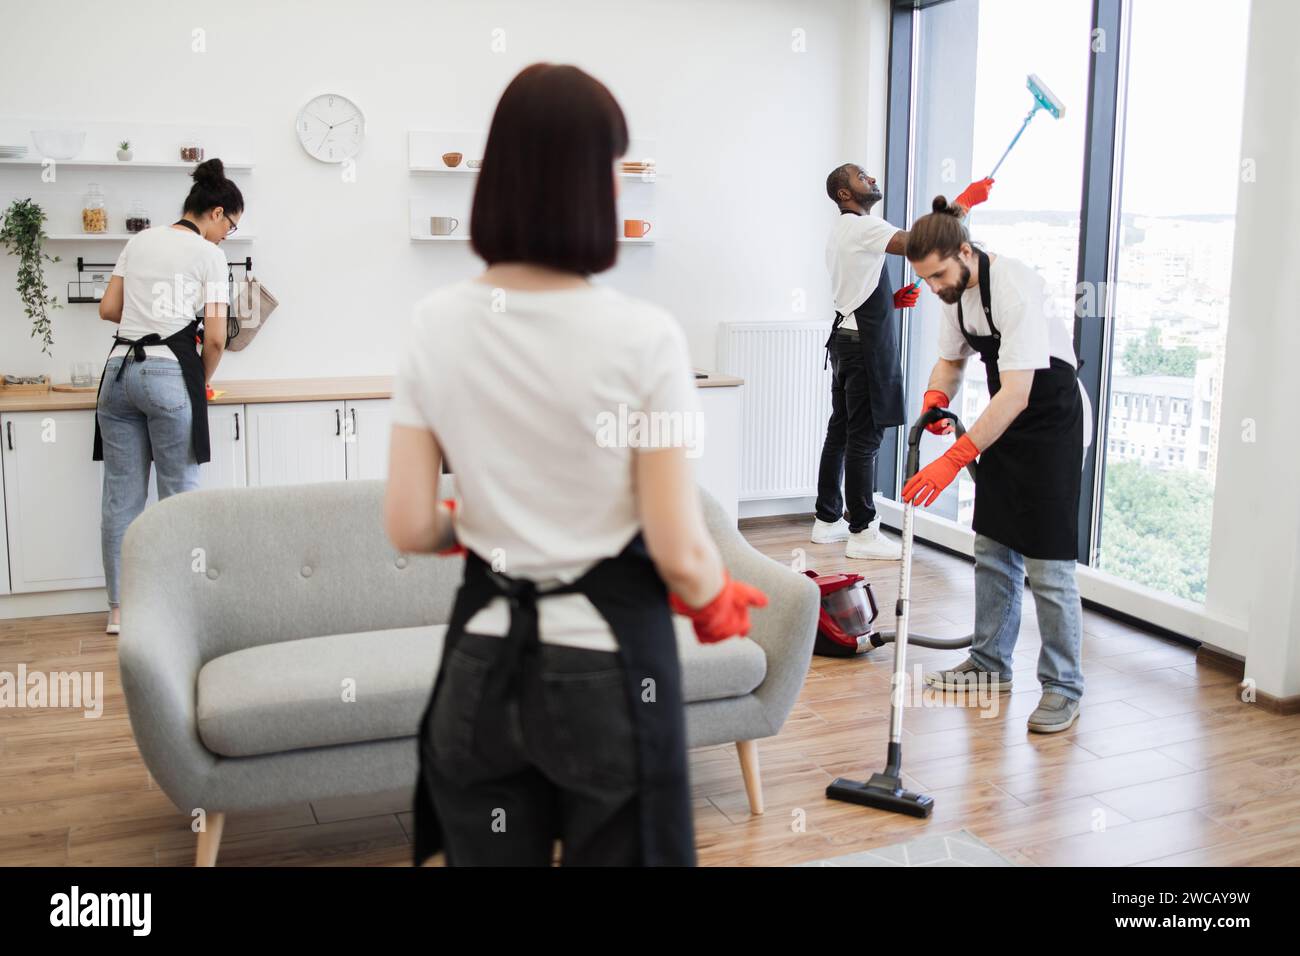 Group of janitors in uniform cleaning office with cleaning equipment. Stock Photo